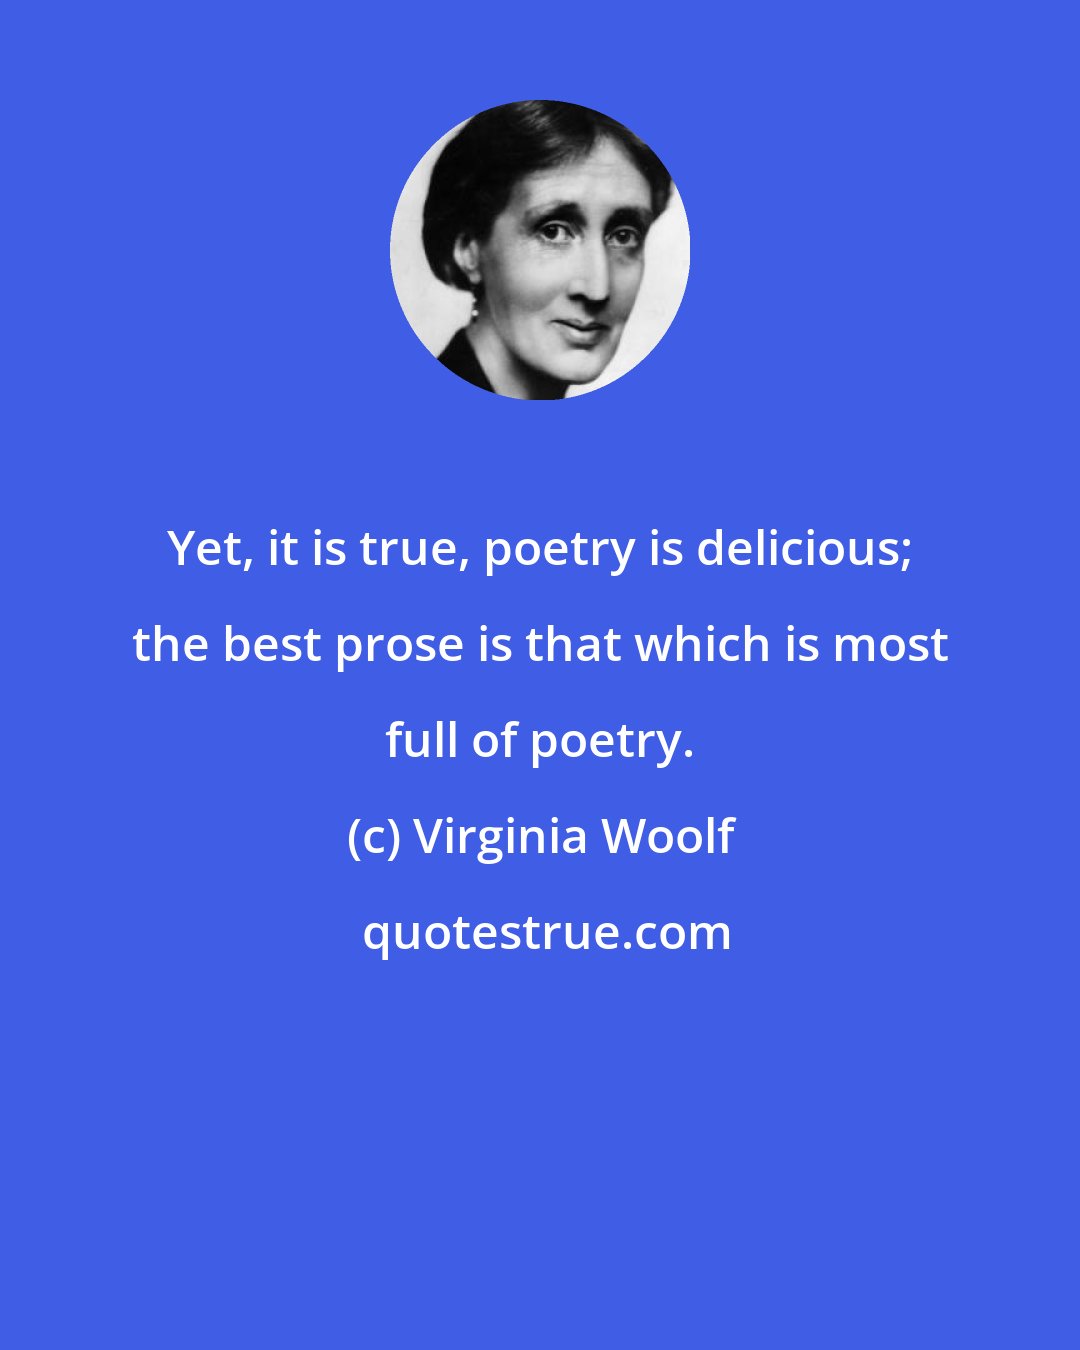 Virginia Woolf: Yet, it is true, poetry is delicious; the best prose is that which is most full of poetry.